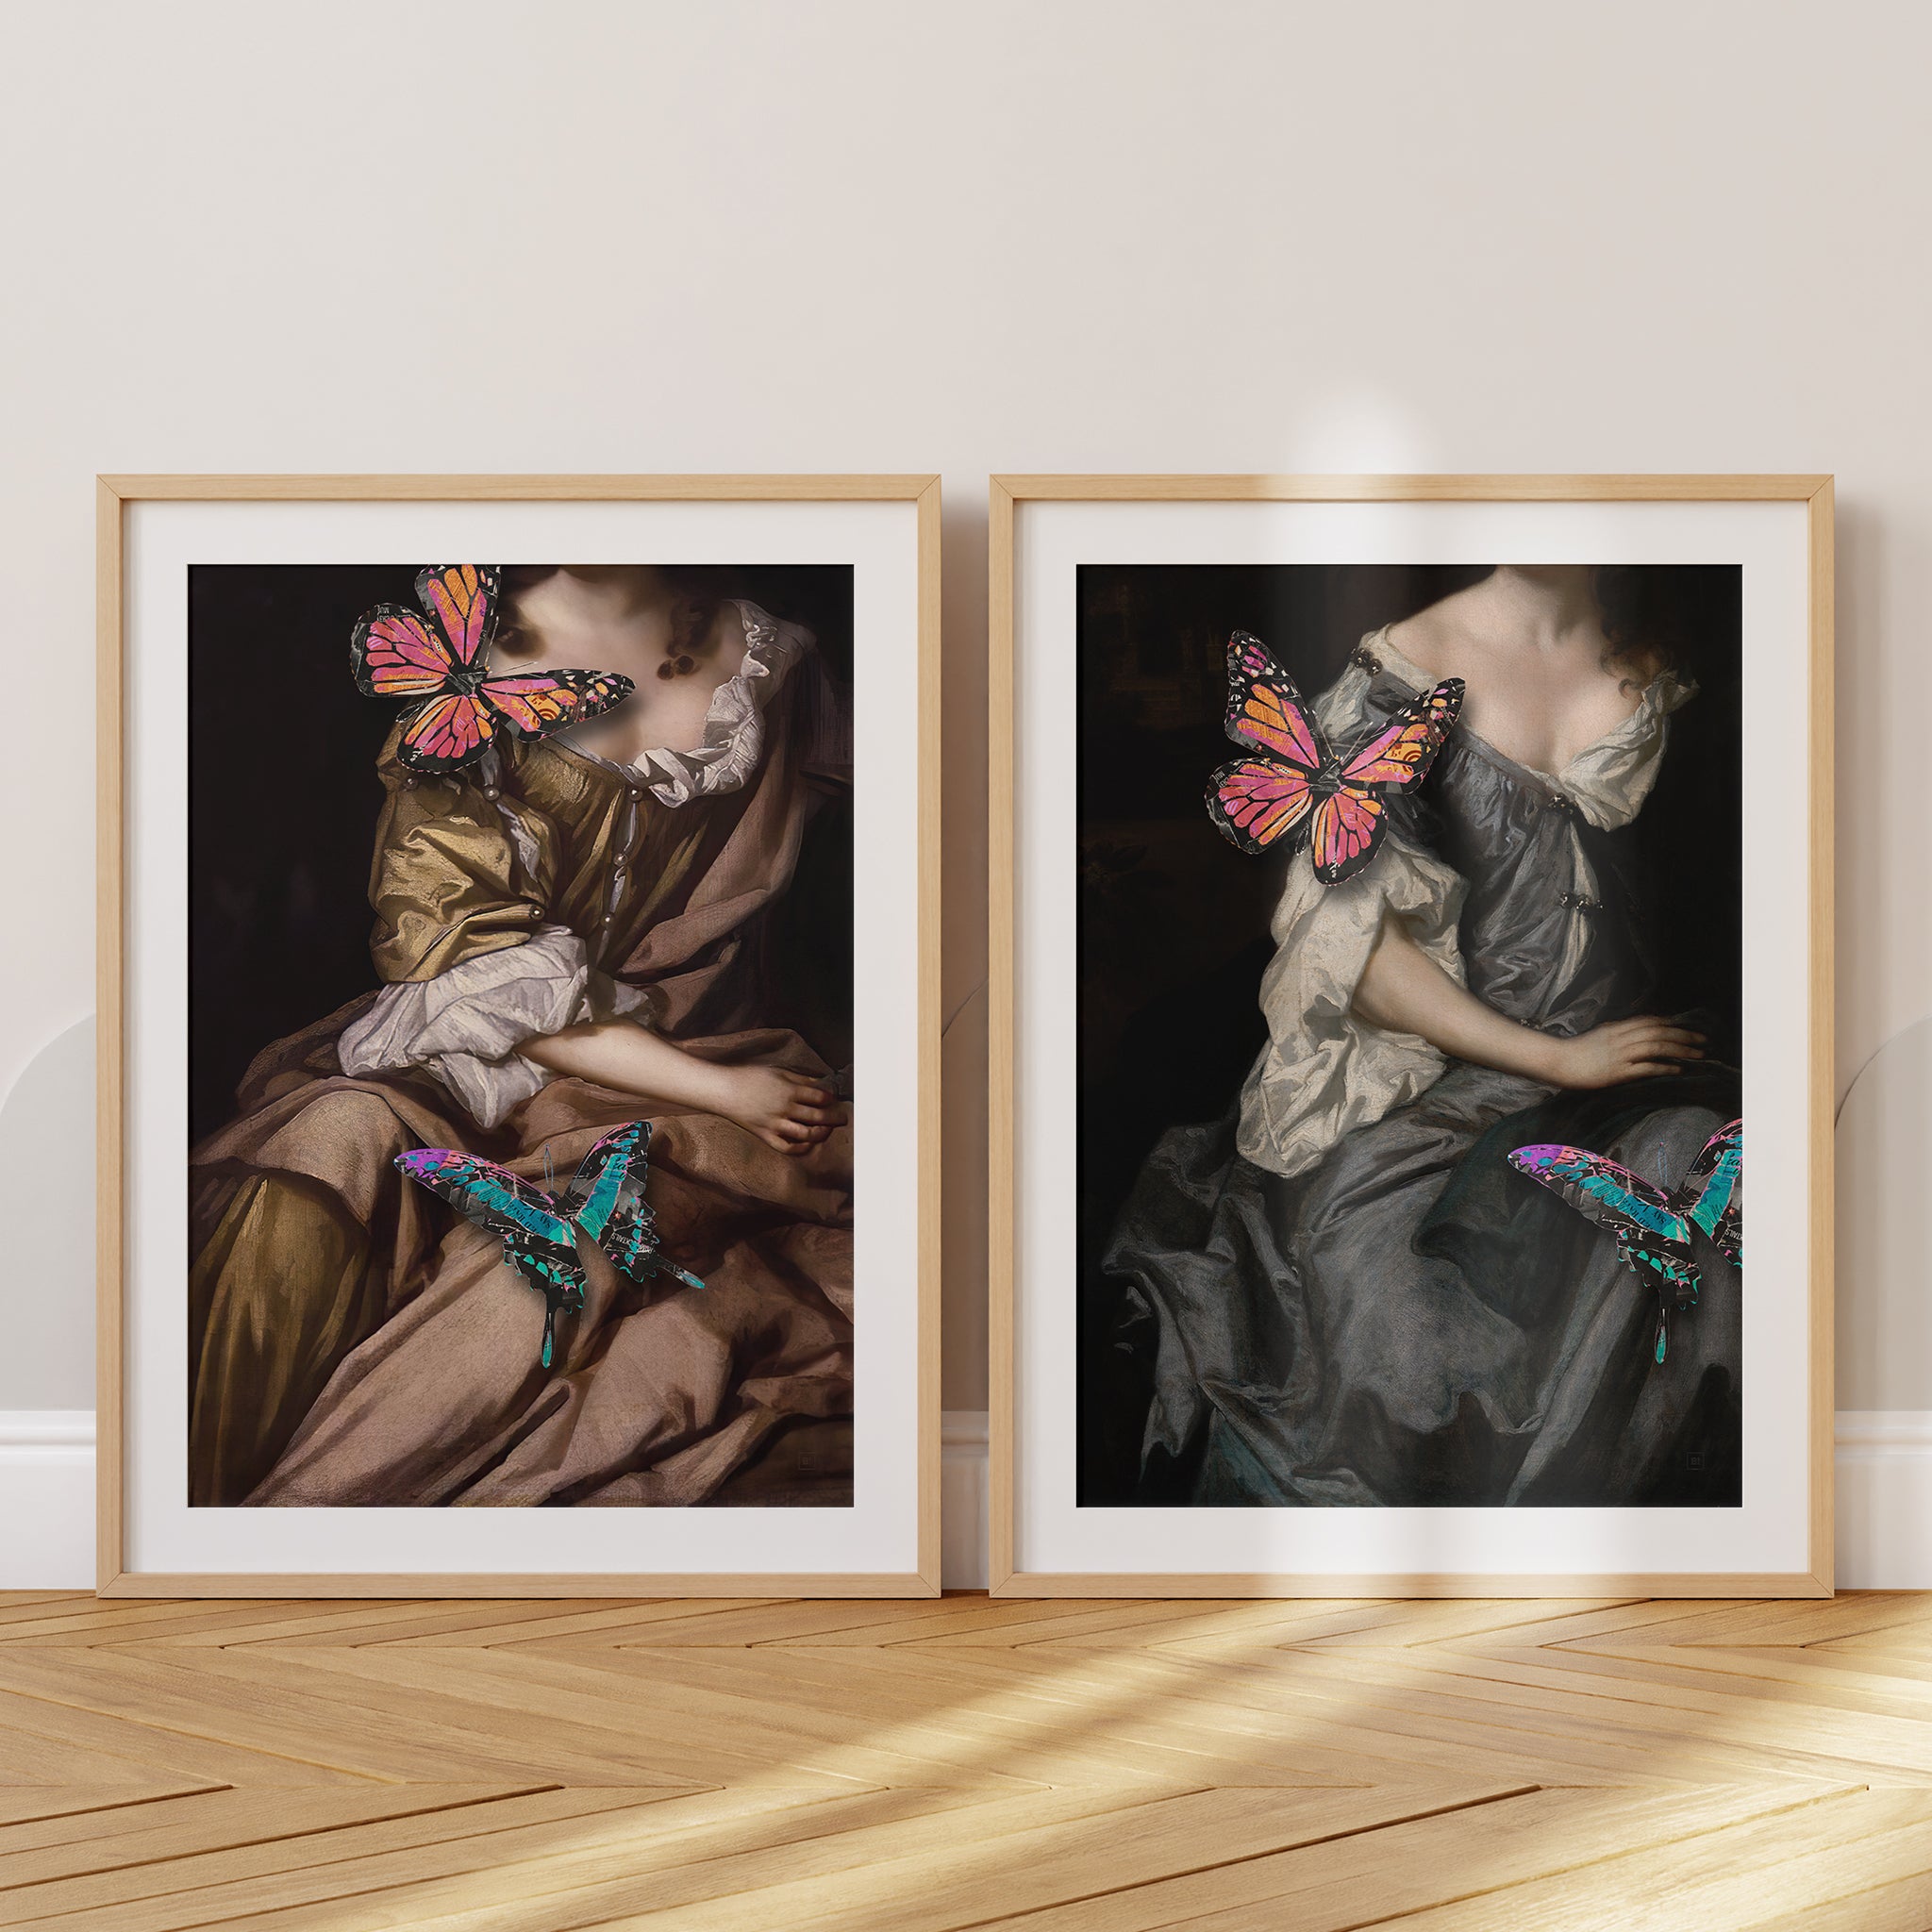 Be inspired by our Victorian portrait with gray dress and butterflies art print. This artwork was printed using the giclée process on archival acid-free paper and is presented in a set of two oak frames with passe-partout that captures its timeless beauty in every detail.